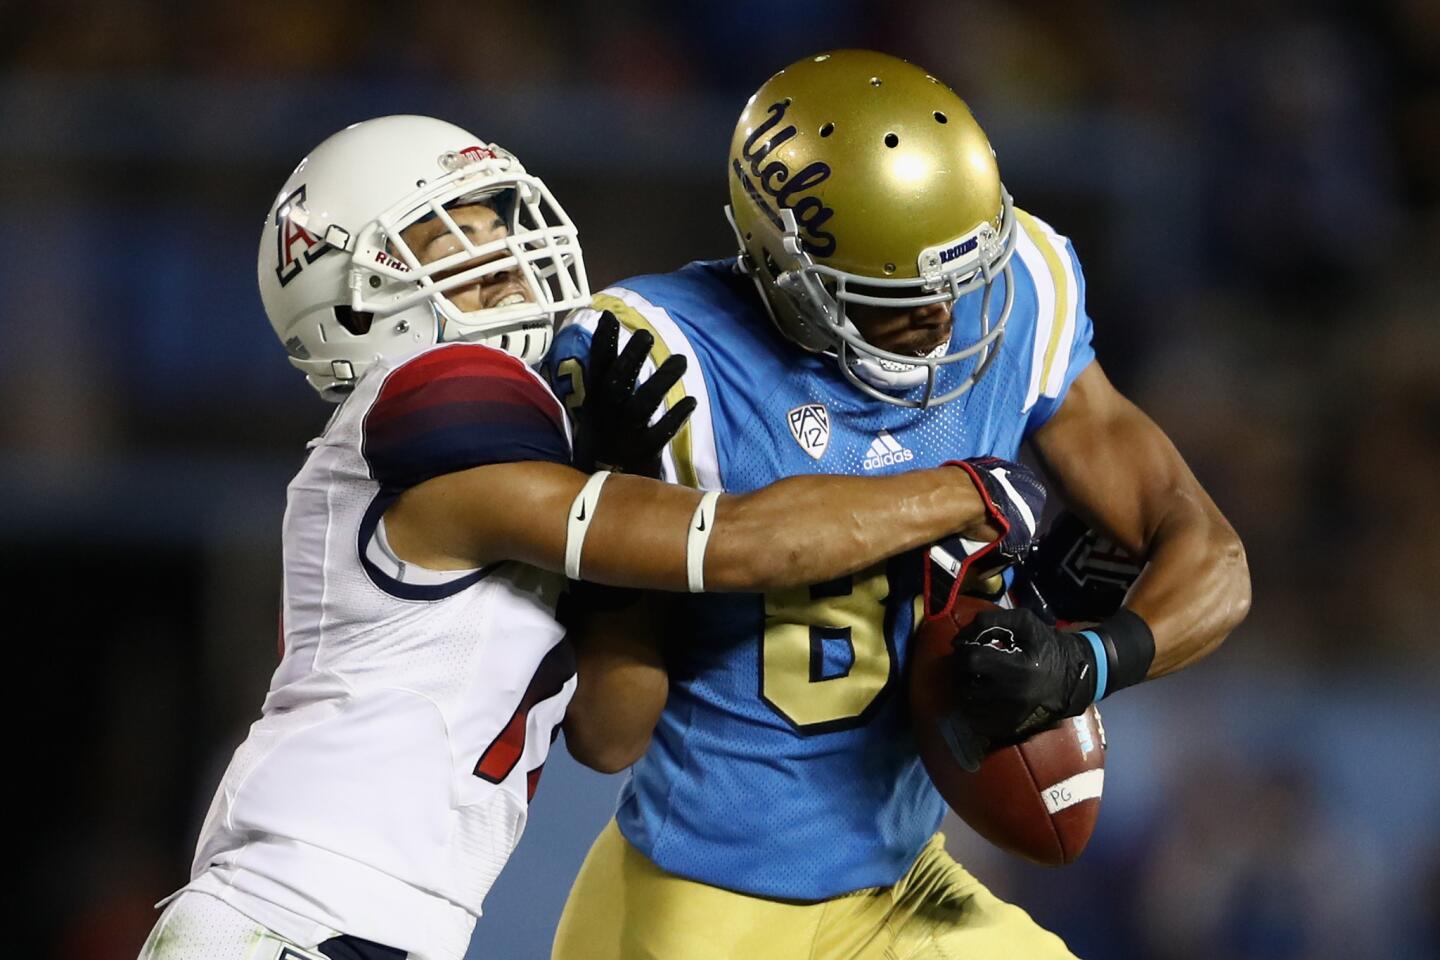 Arizona defensive back Jace Whittaker strips the ball from UCLA receiver Eldridge Massington during the first half.